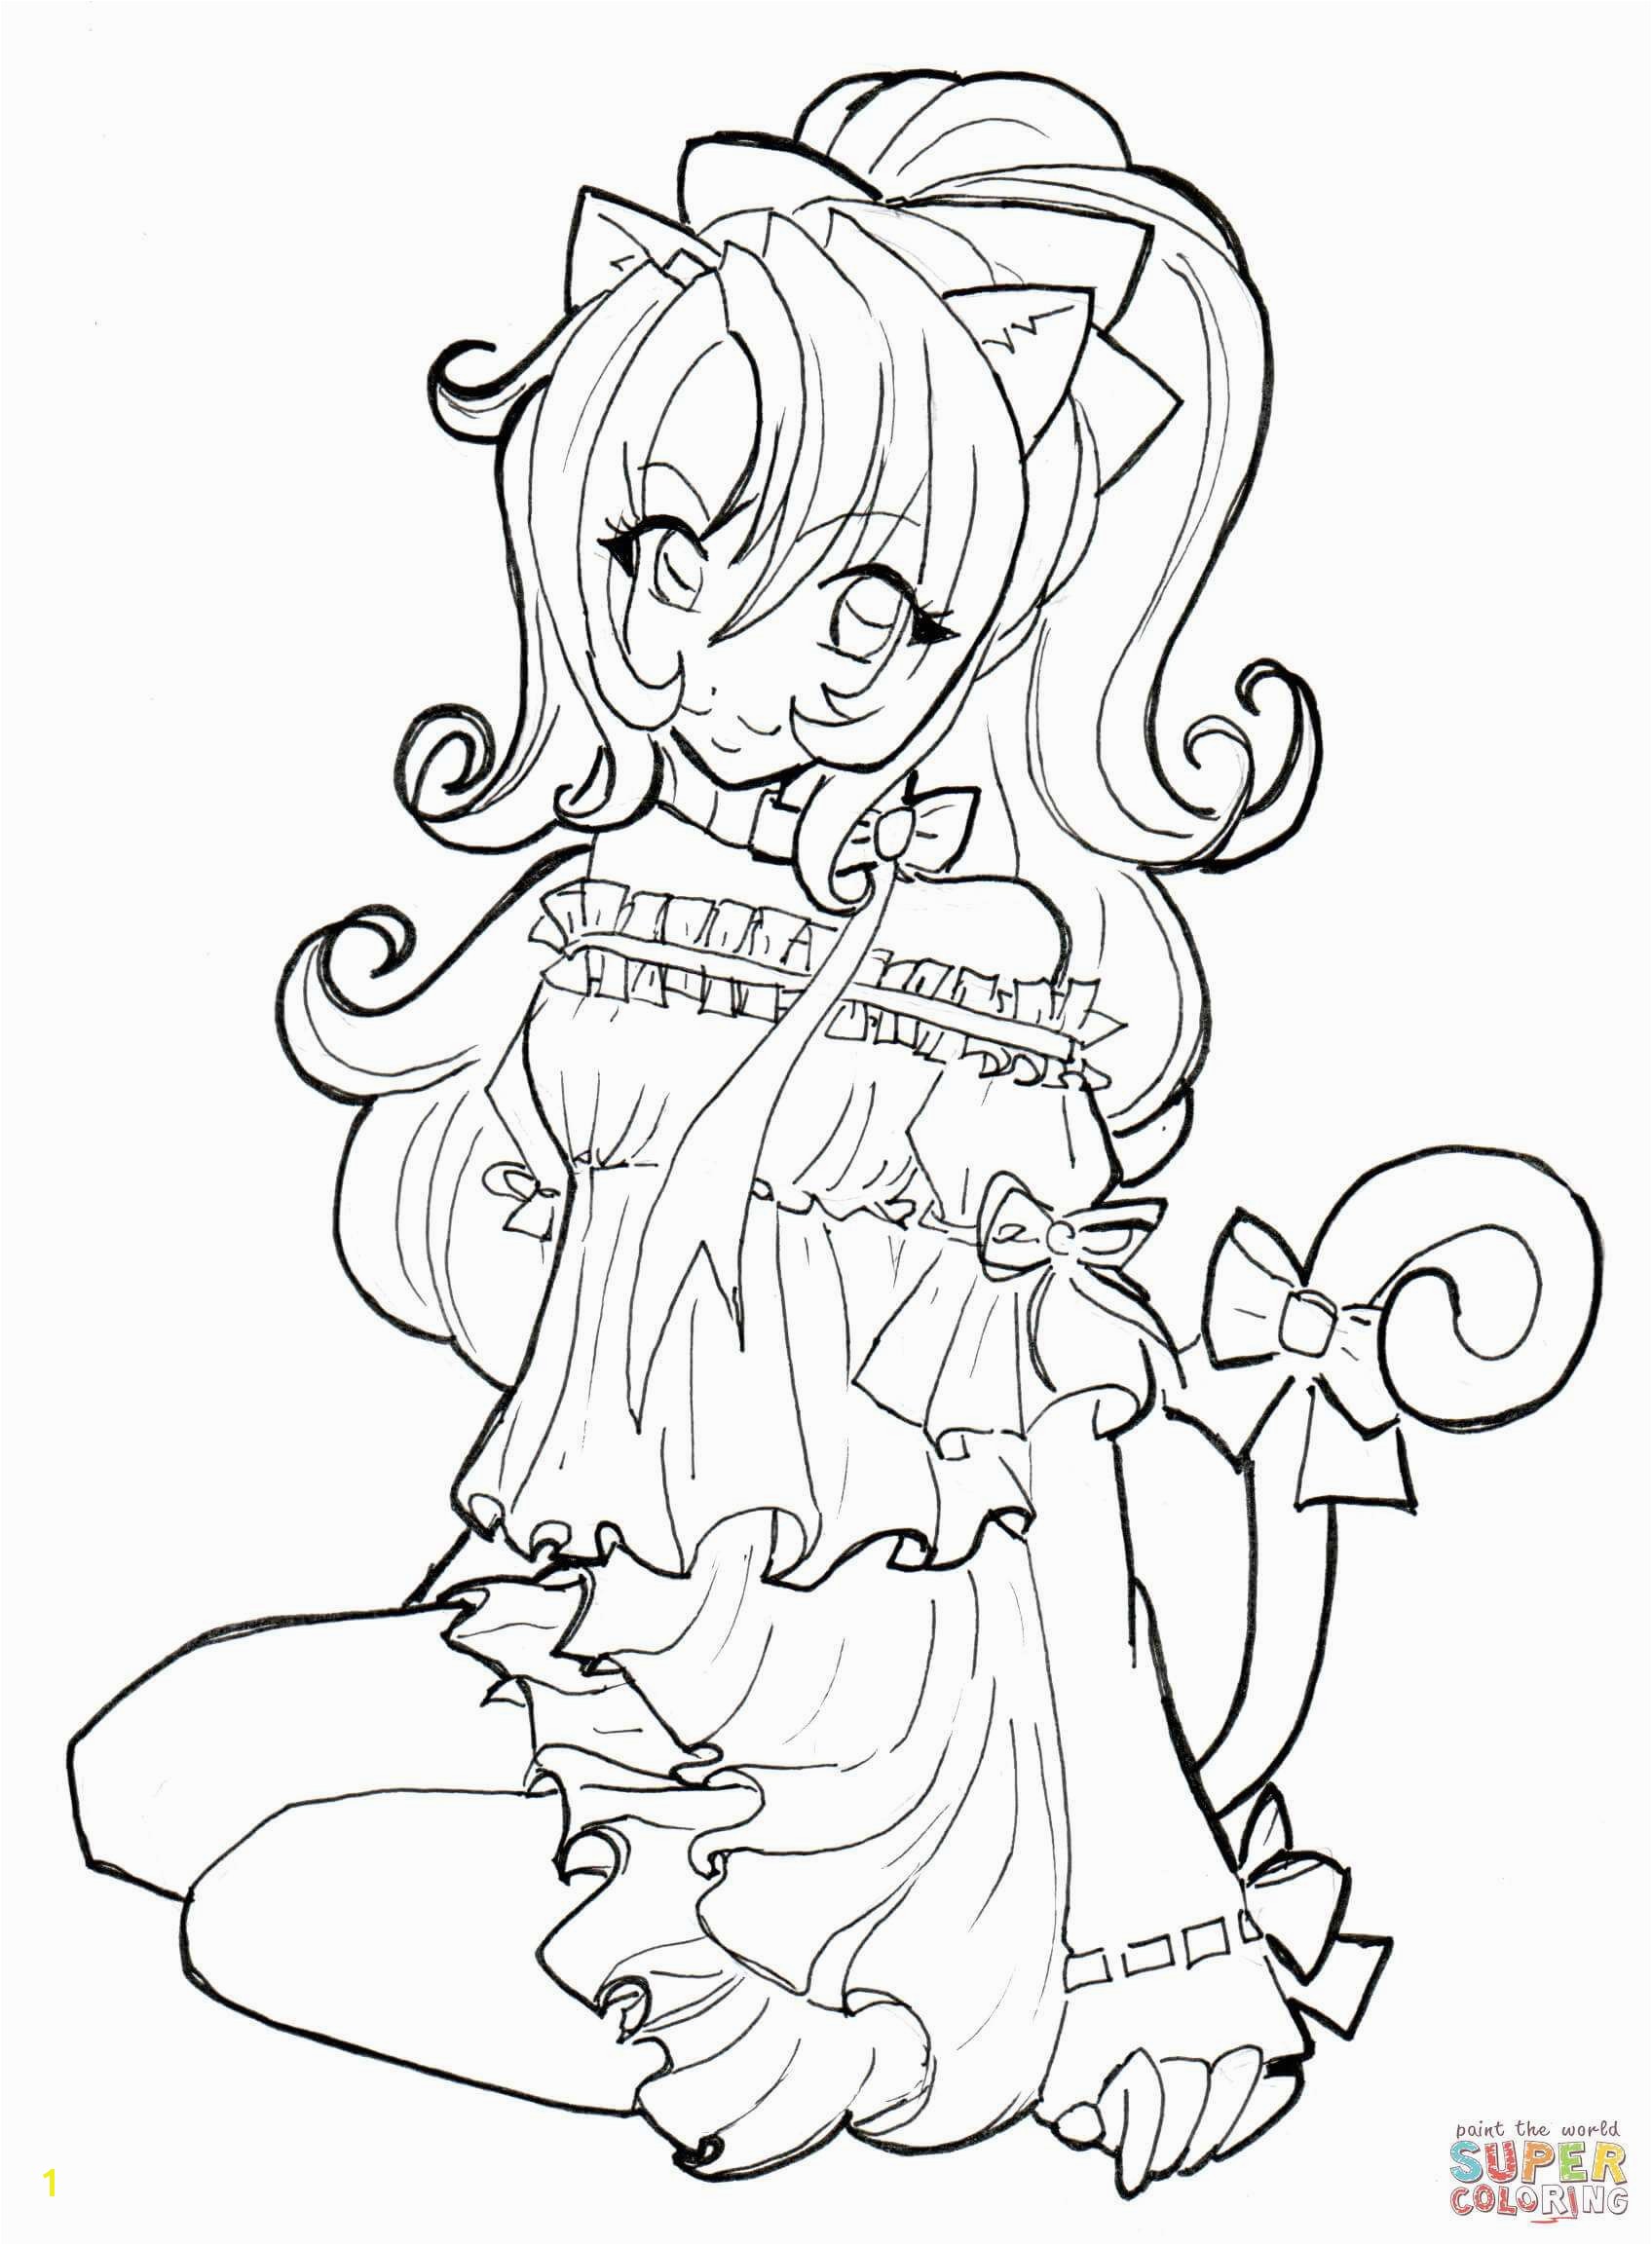 Cute Anime Coloring Pages Cute Anime Chibi Girl Coloring Pages Best Witch Coloring Page